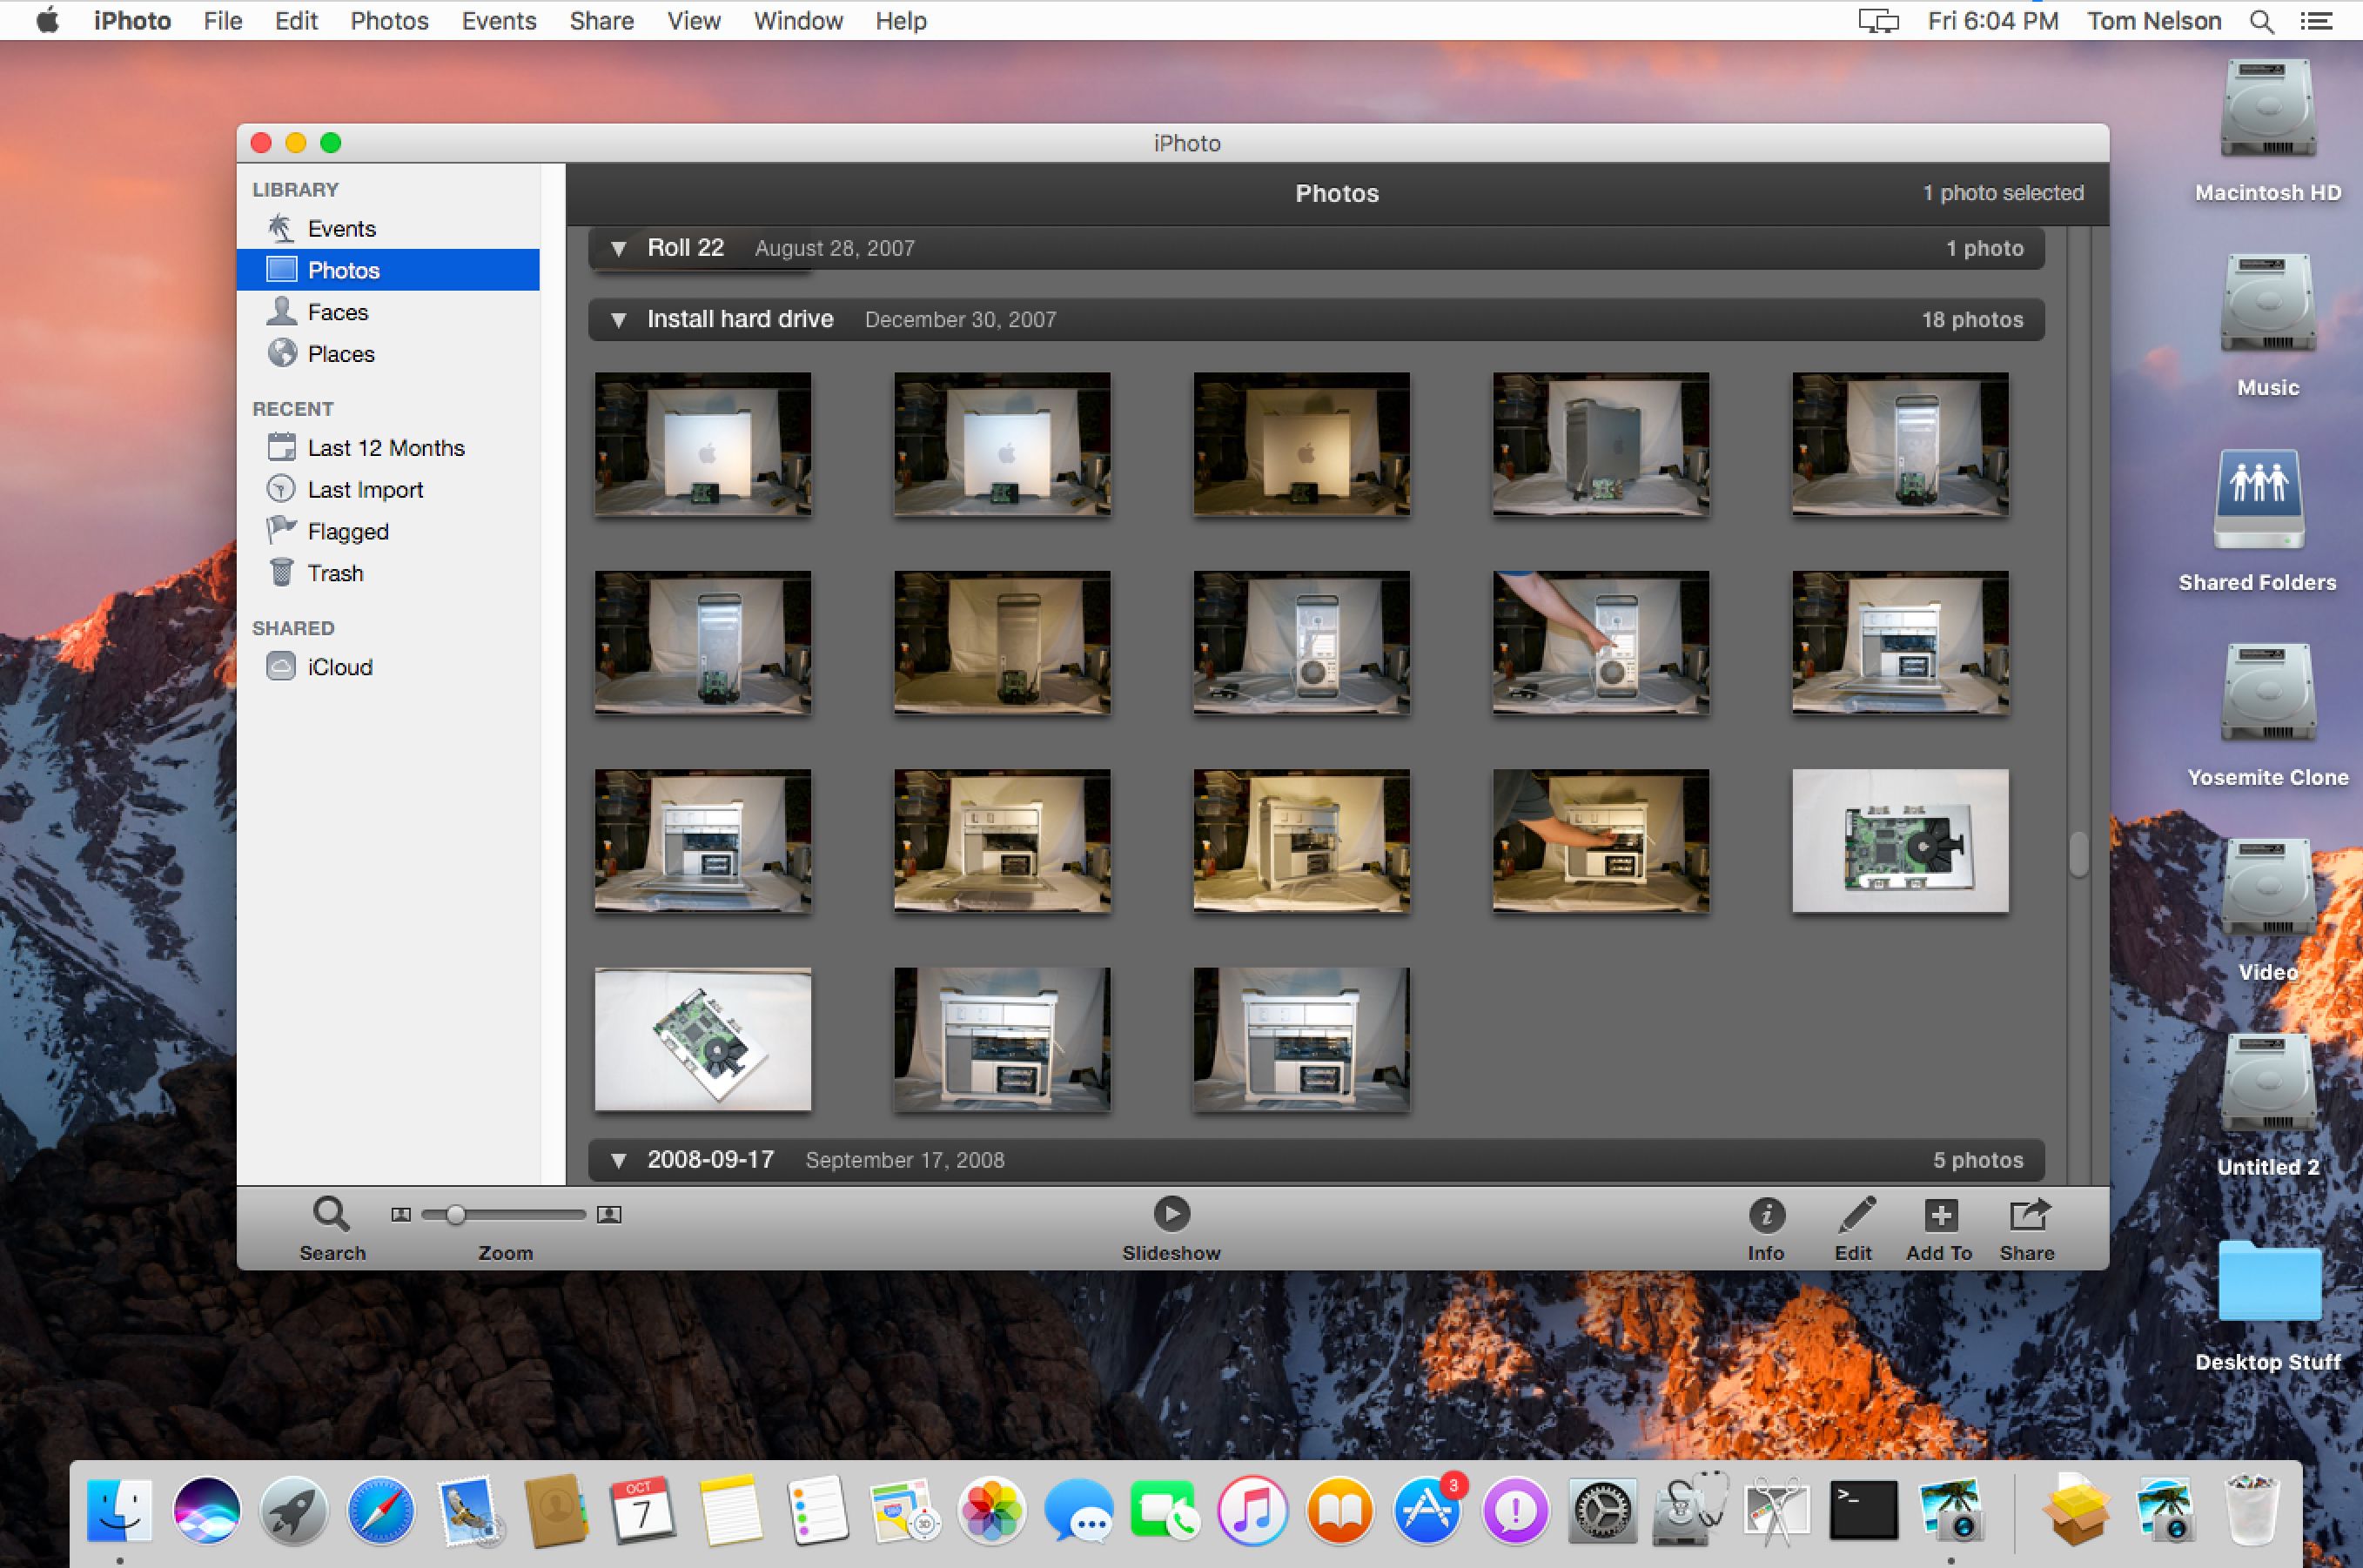 iphoto for the mac